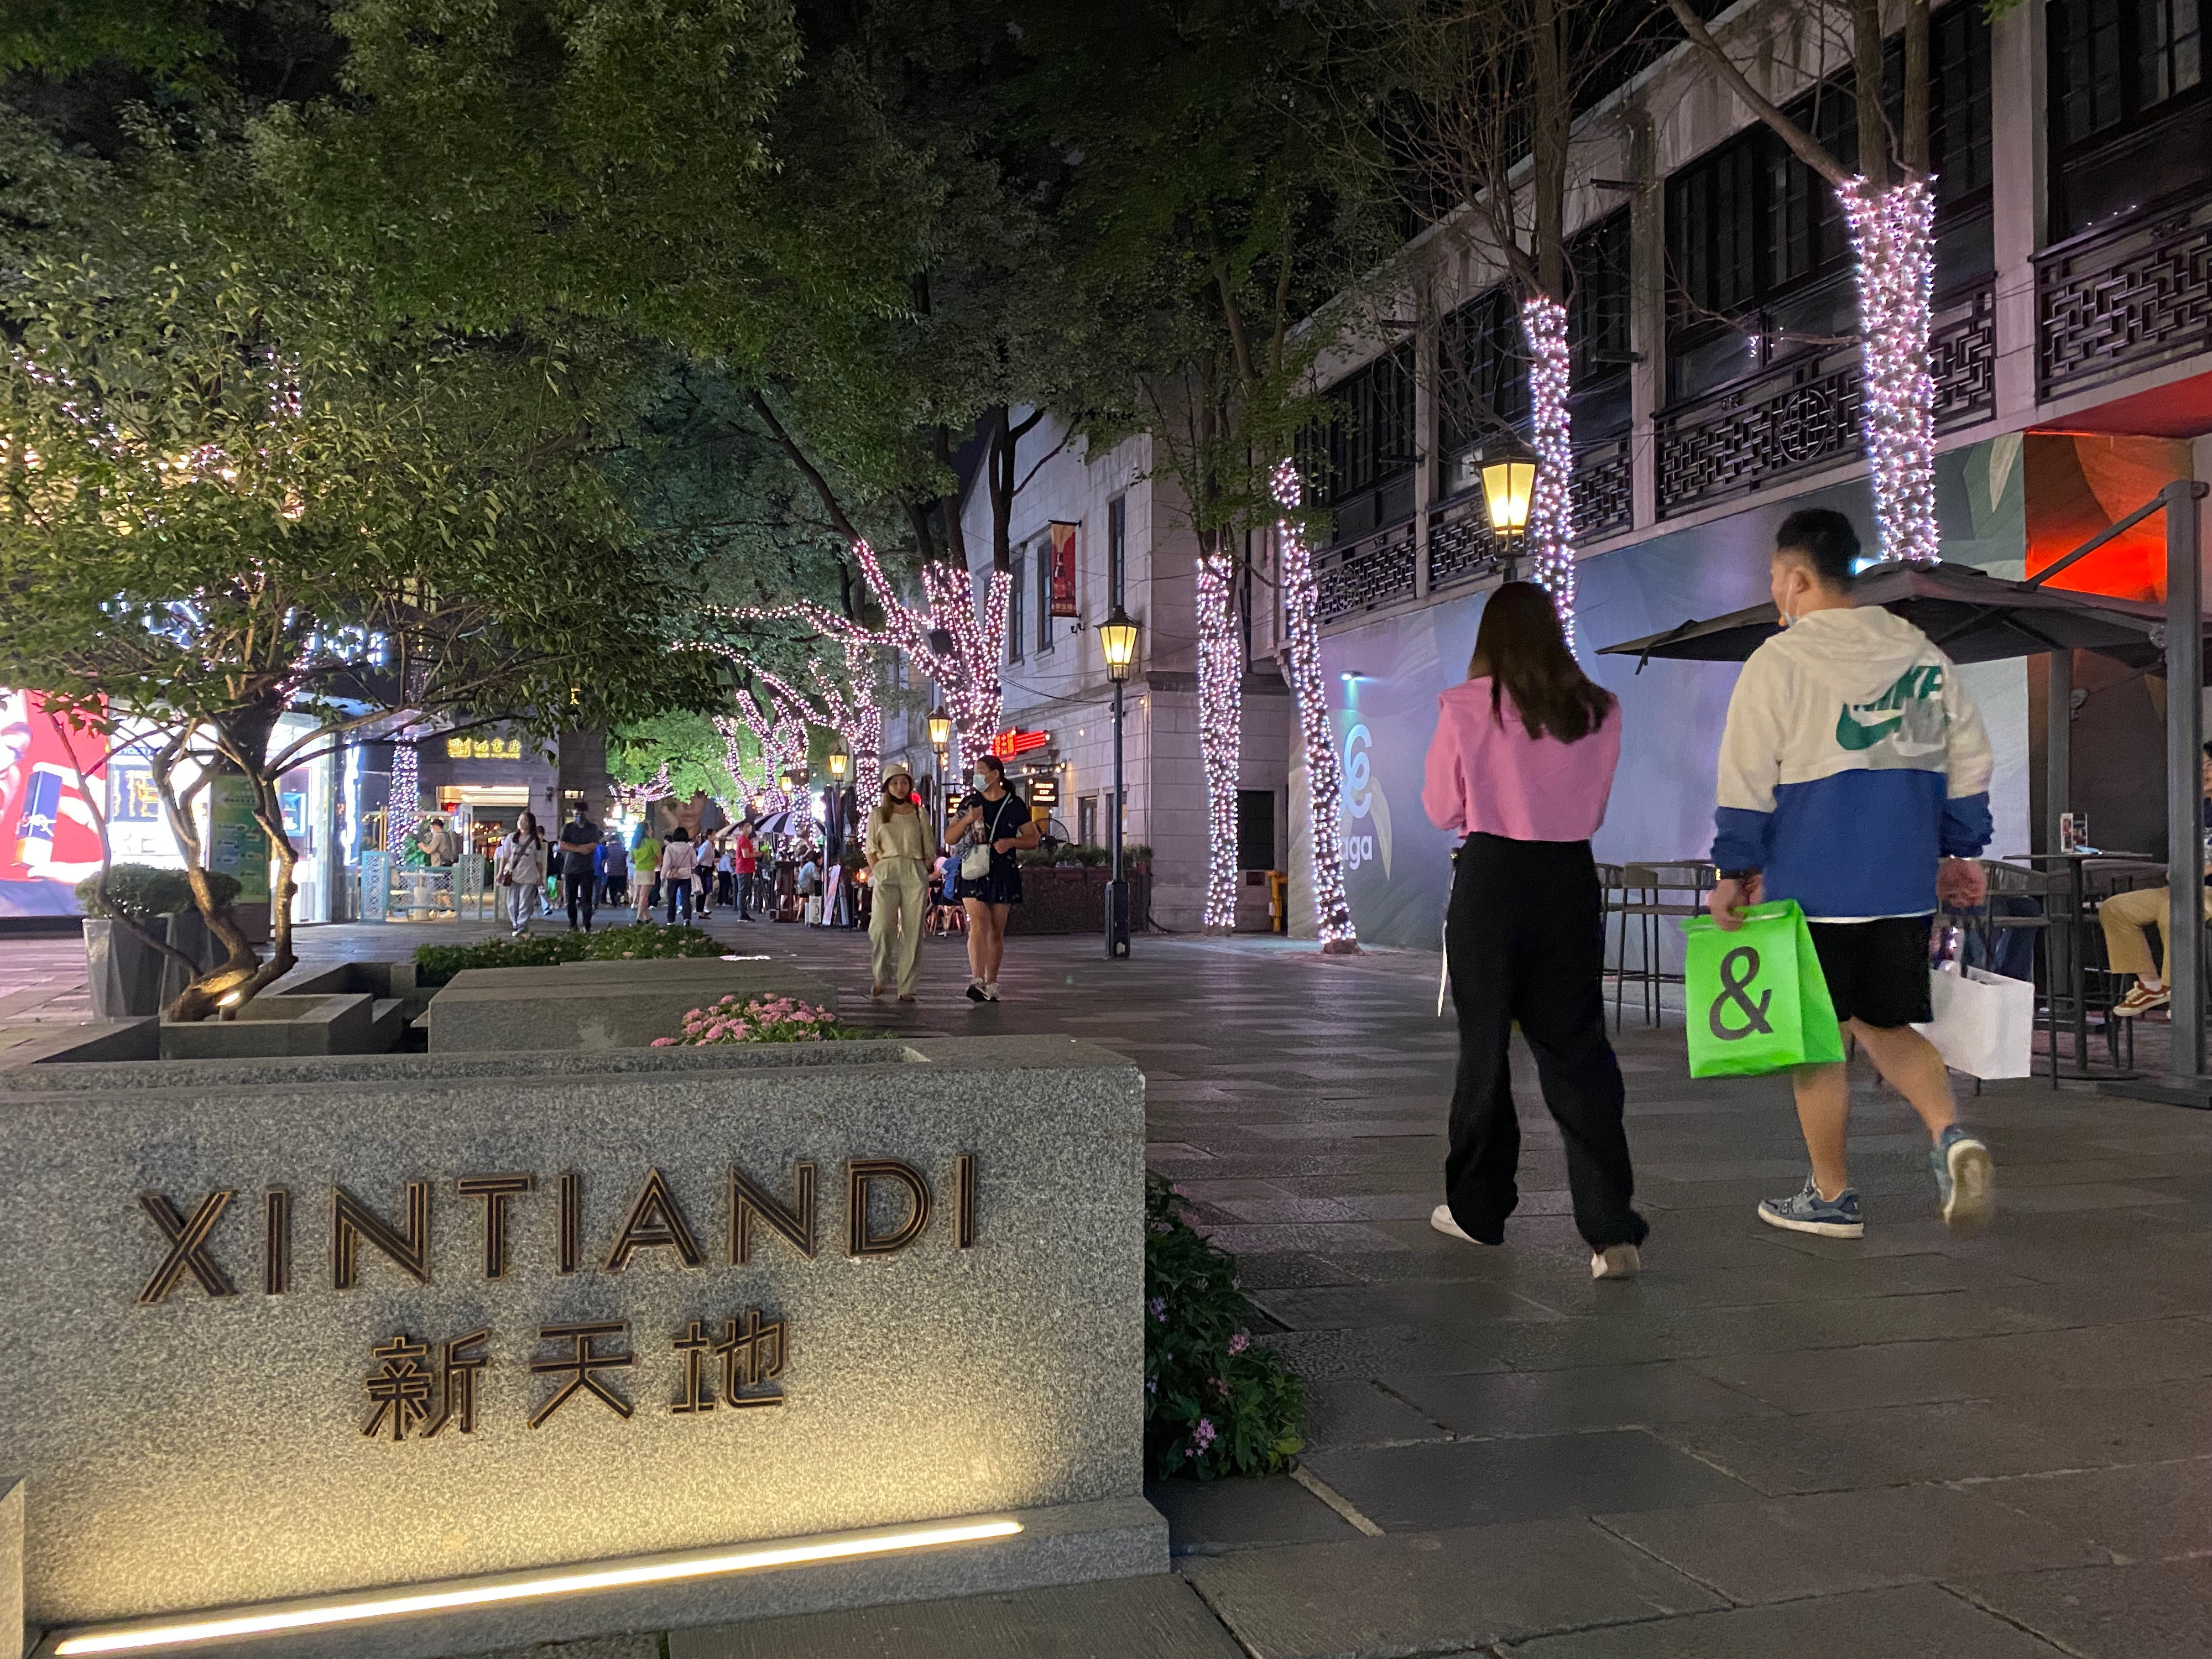 Young people walk past commercial compound Xintiandi in Shanghai on September 20, 2022. Photo: SCMP / Yaling Jiang